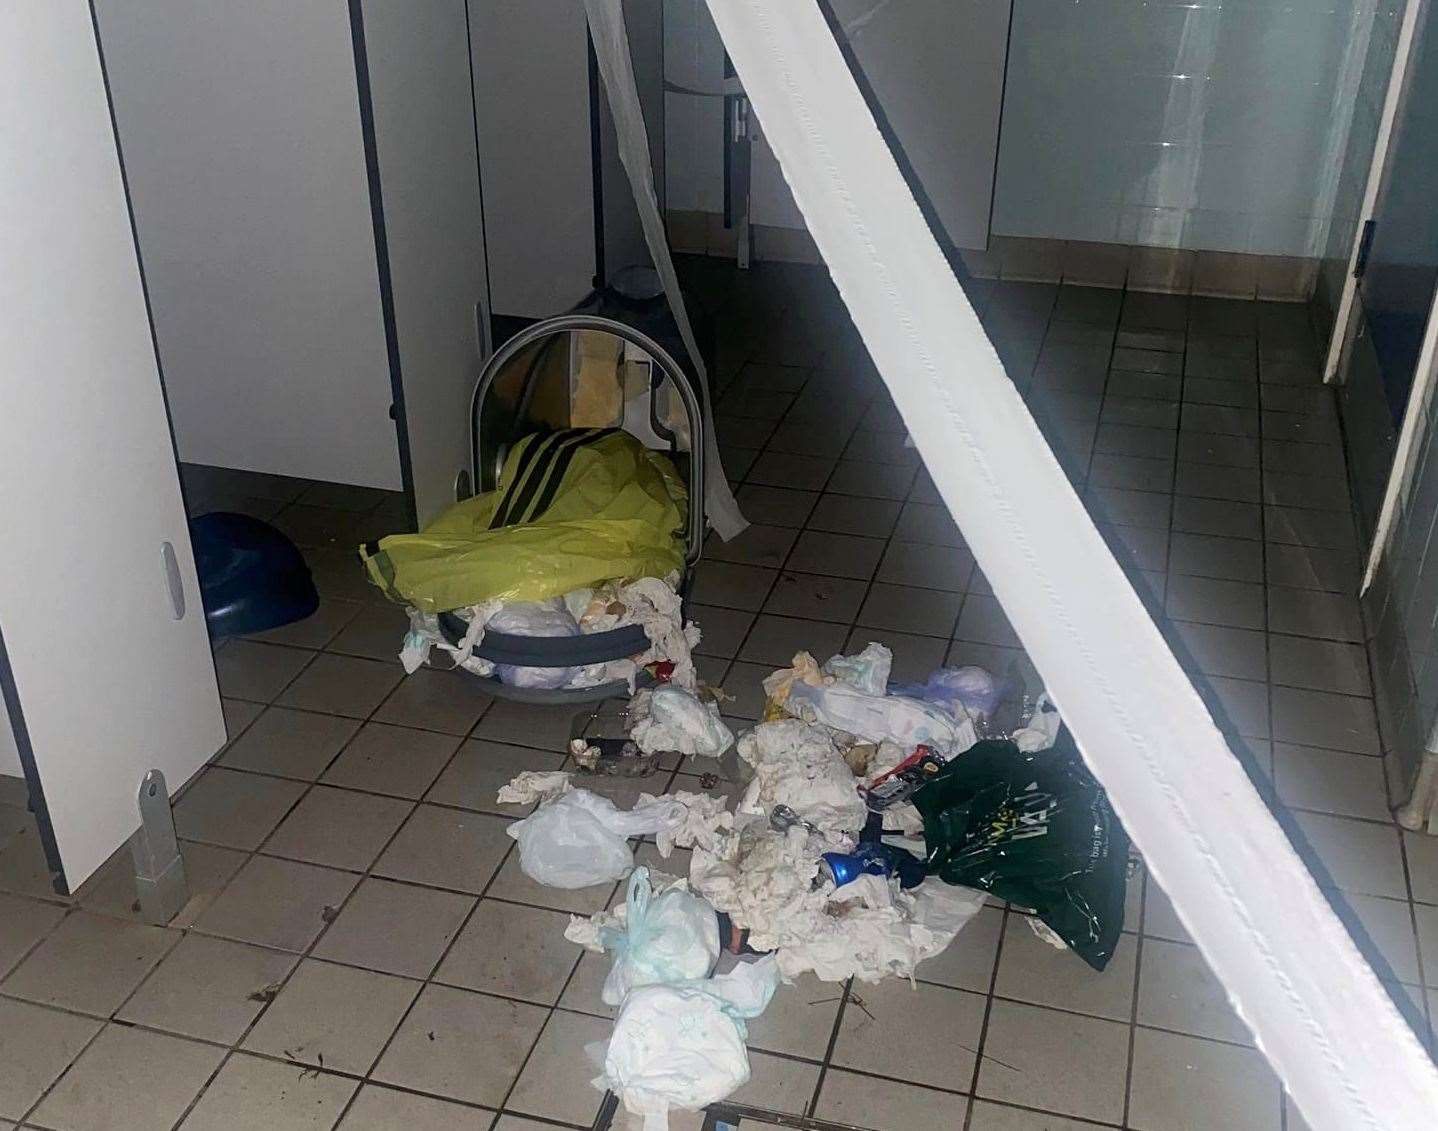 Rubbish was left covering the floor of the women’s toilets at Tenterden Recreation Ground. Picture: Tenterden Town Council